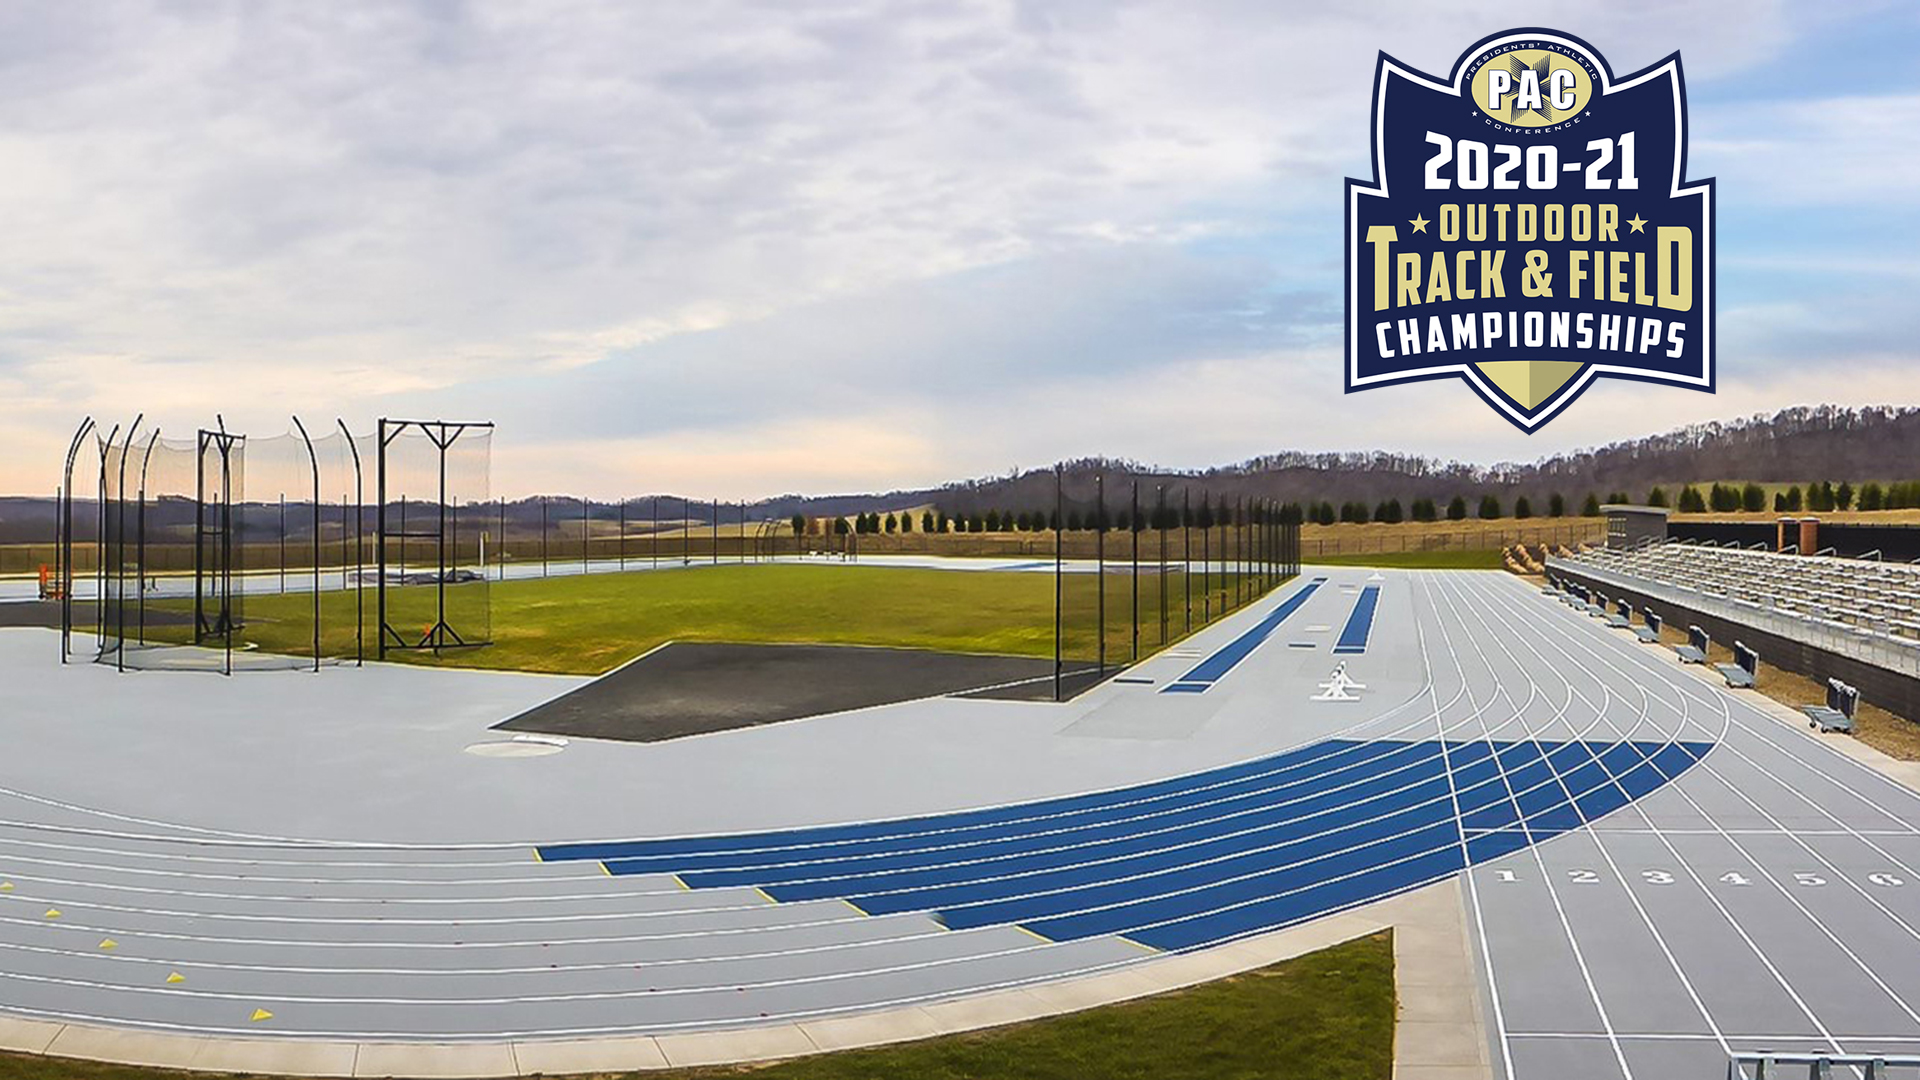 PAC announces WVU's Mylan Park as site of outdoor track and field championships